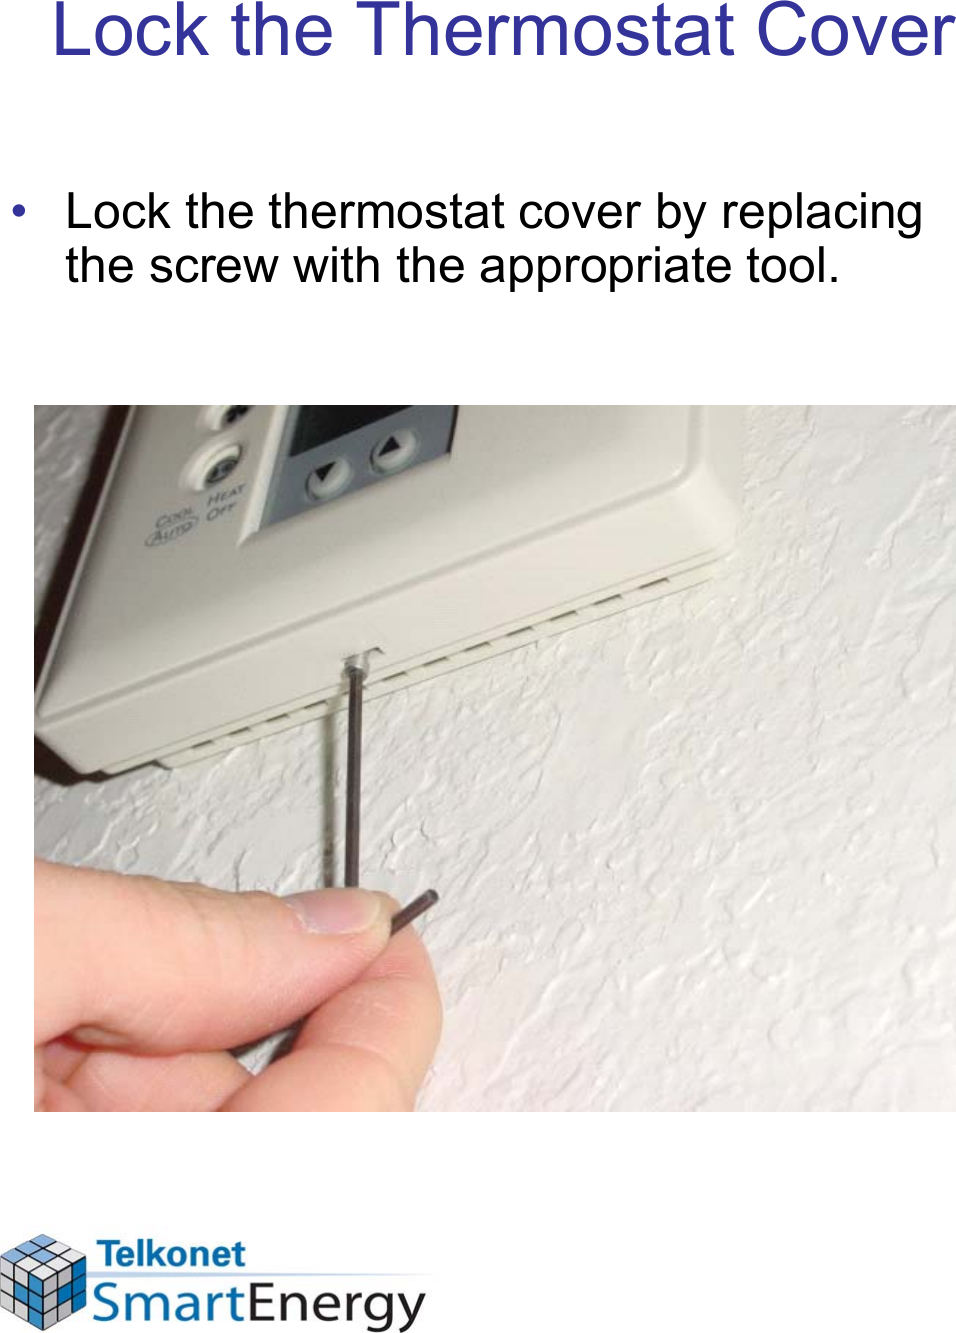 Lock the Thermostat Cover• Lock the thermostat cover by replacing the screw with the appropriate tool.